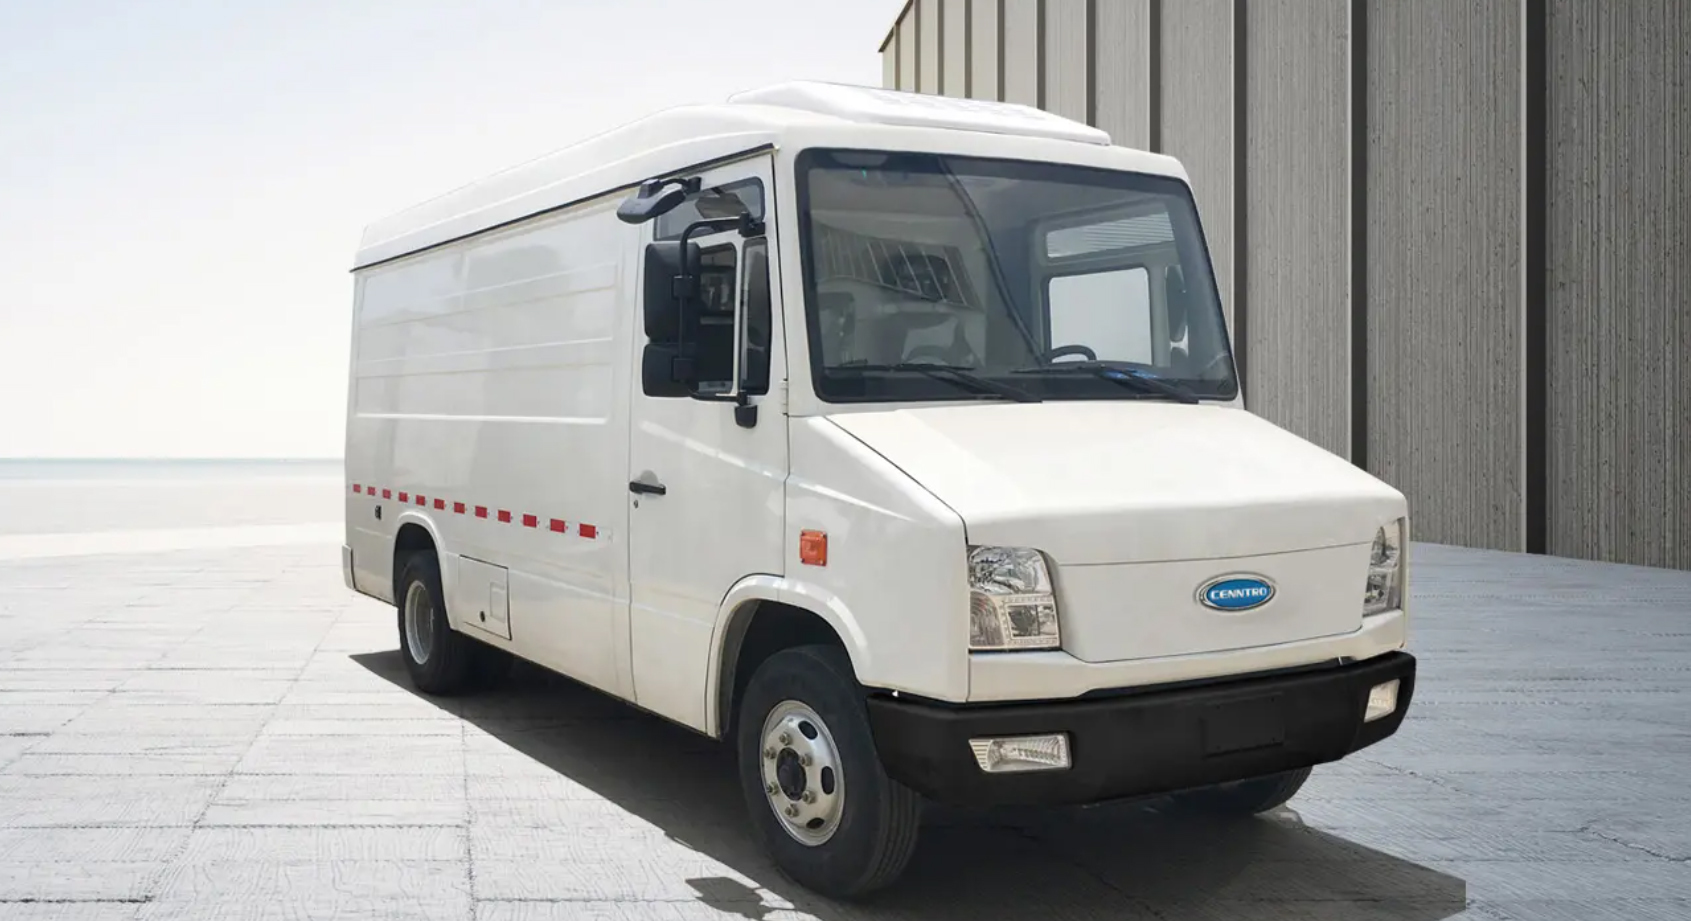 The Cenntro Logistar 400 has a top speed of 60 mph.